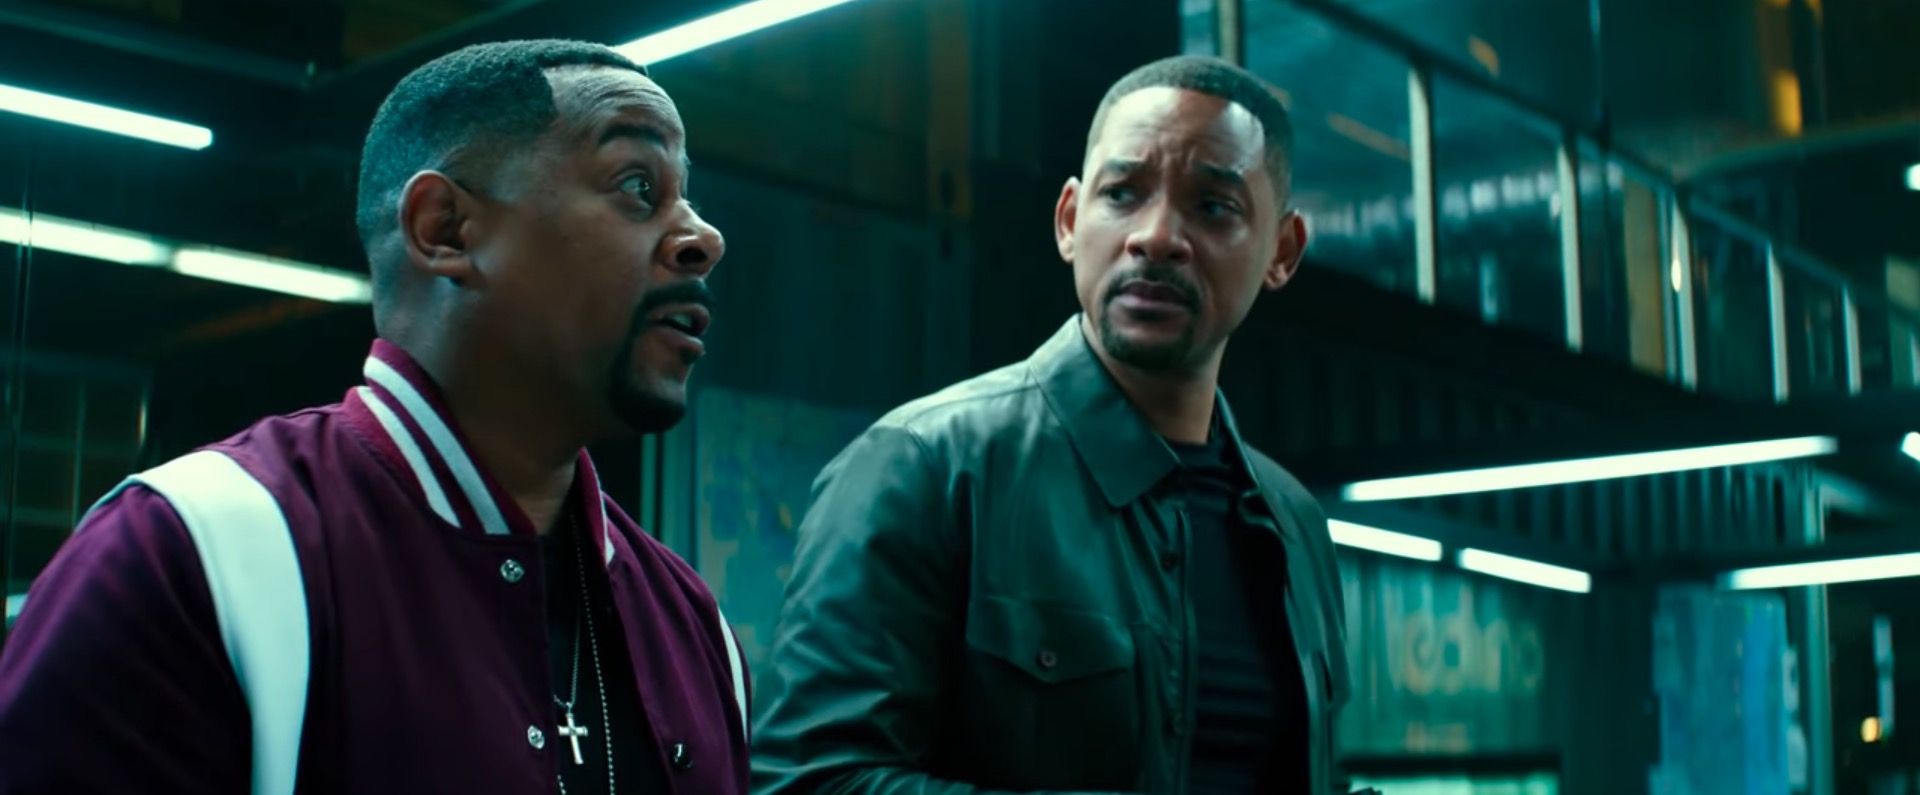 Bad Boys 3 Cast Release Date Trailer And More